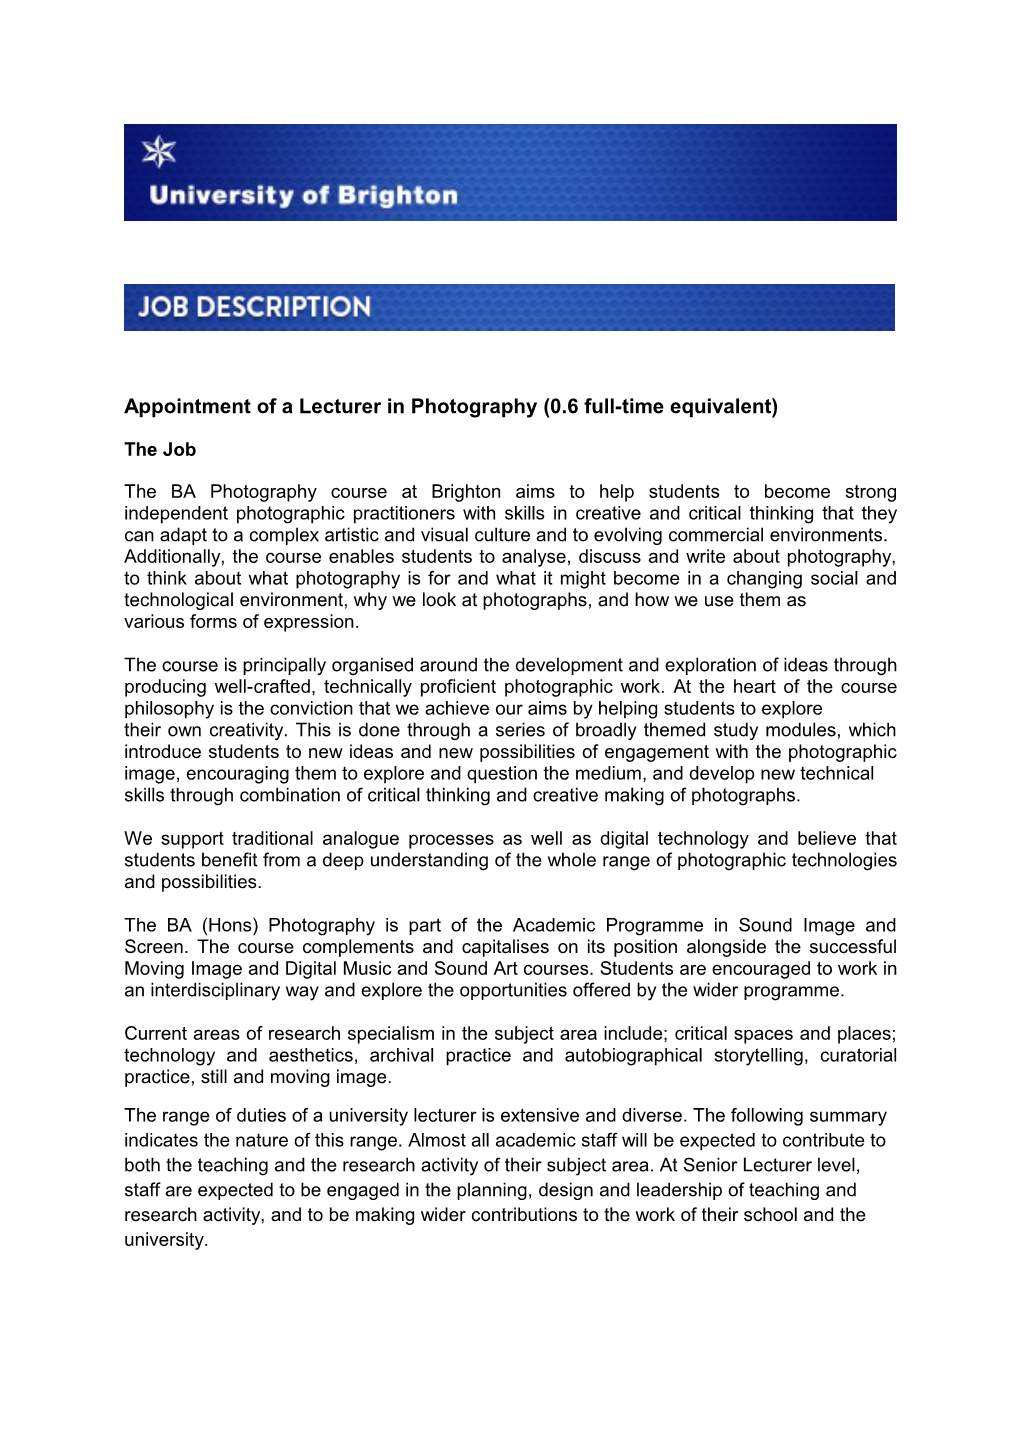 Appointment of a Lecturer in Photography (0.6 Full-Time Equivalent)